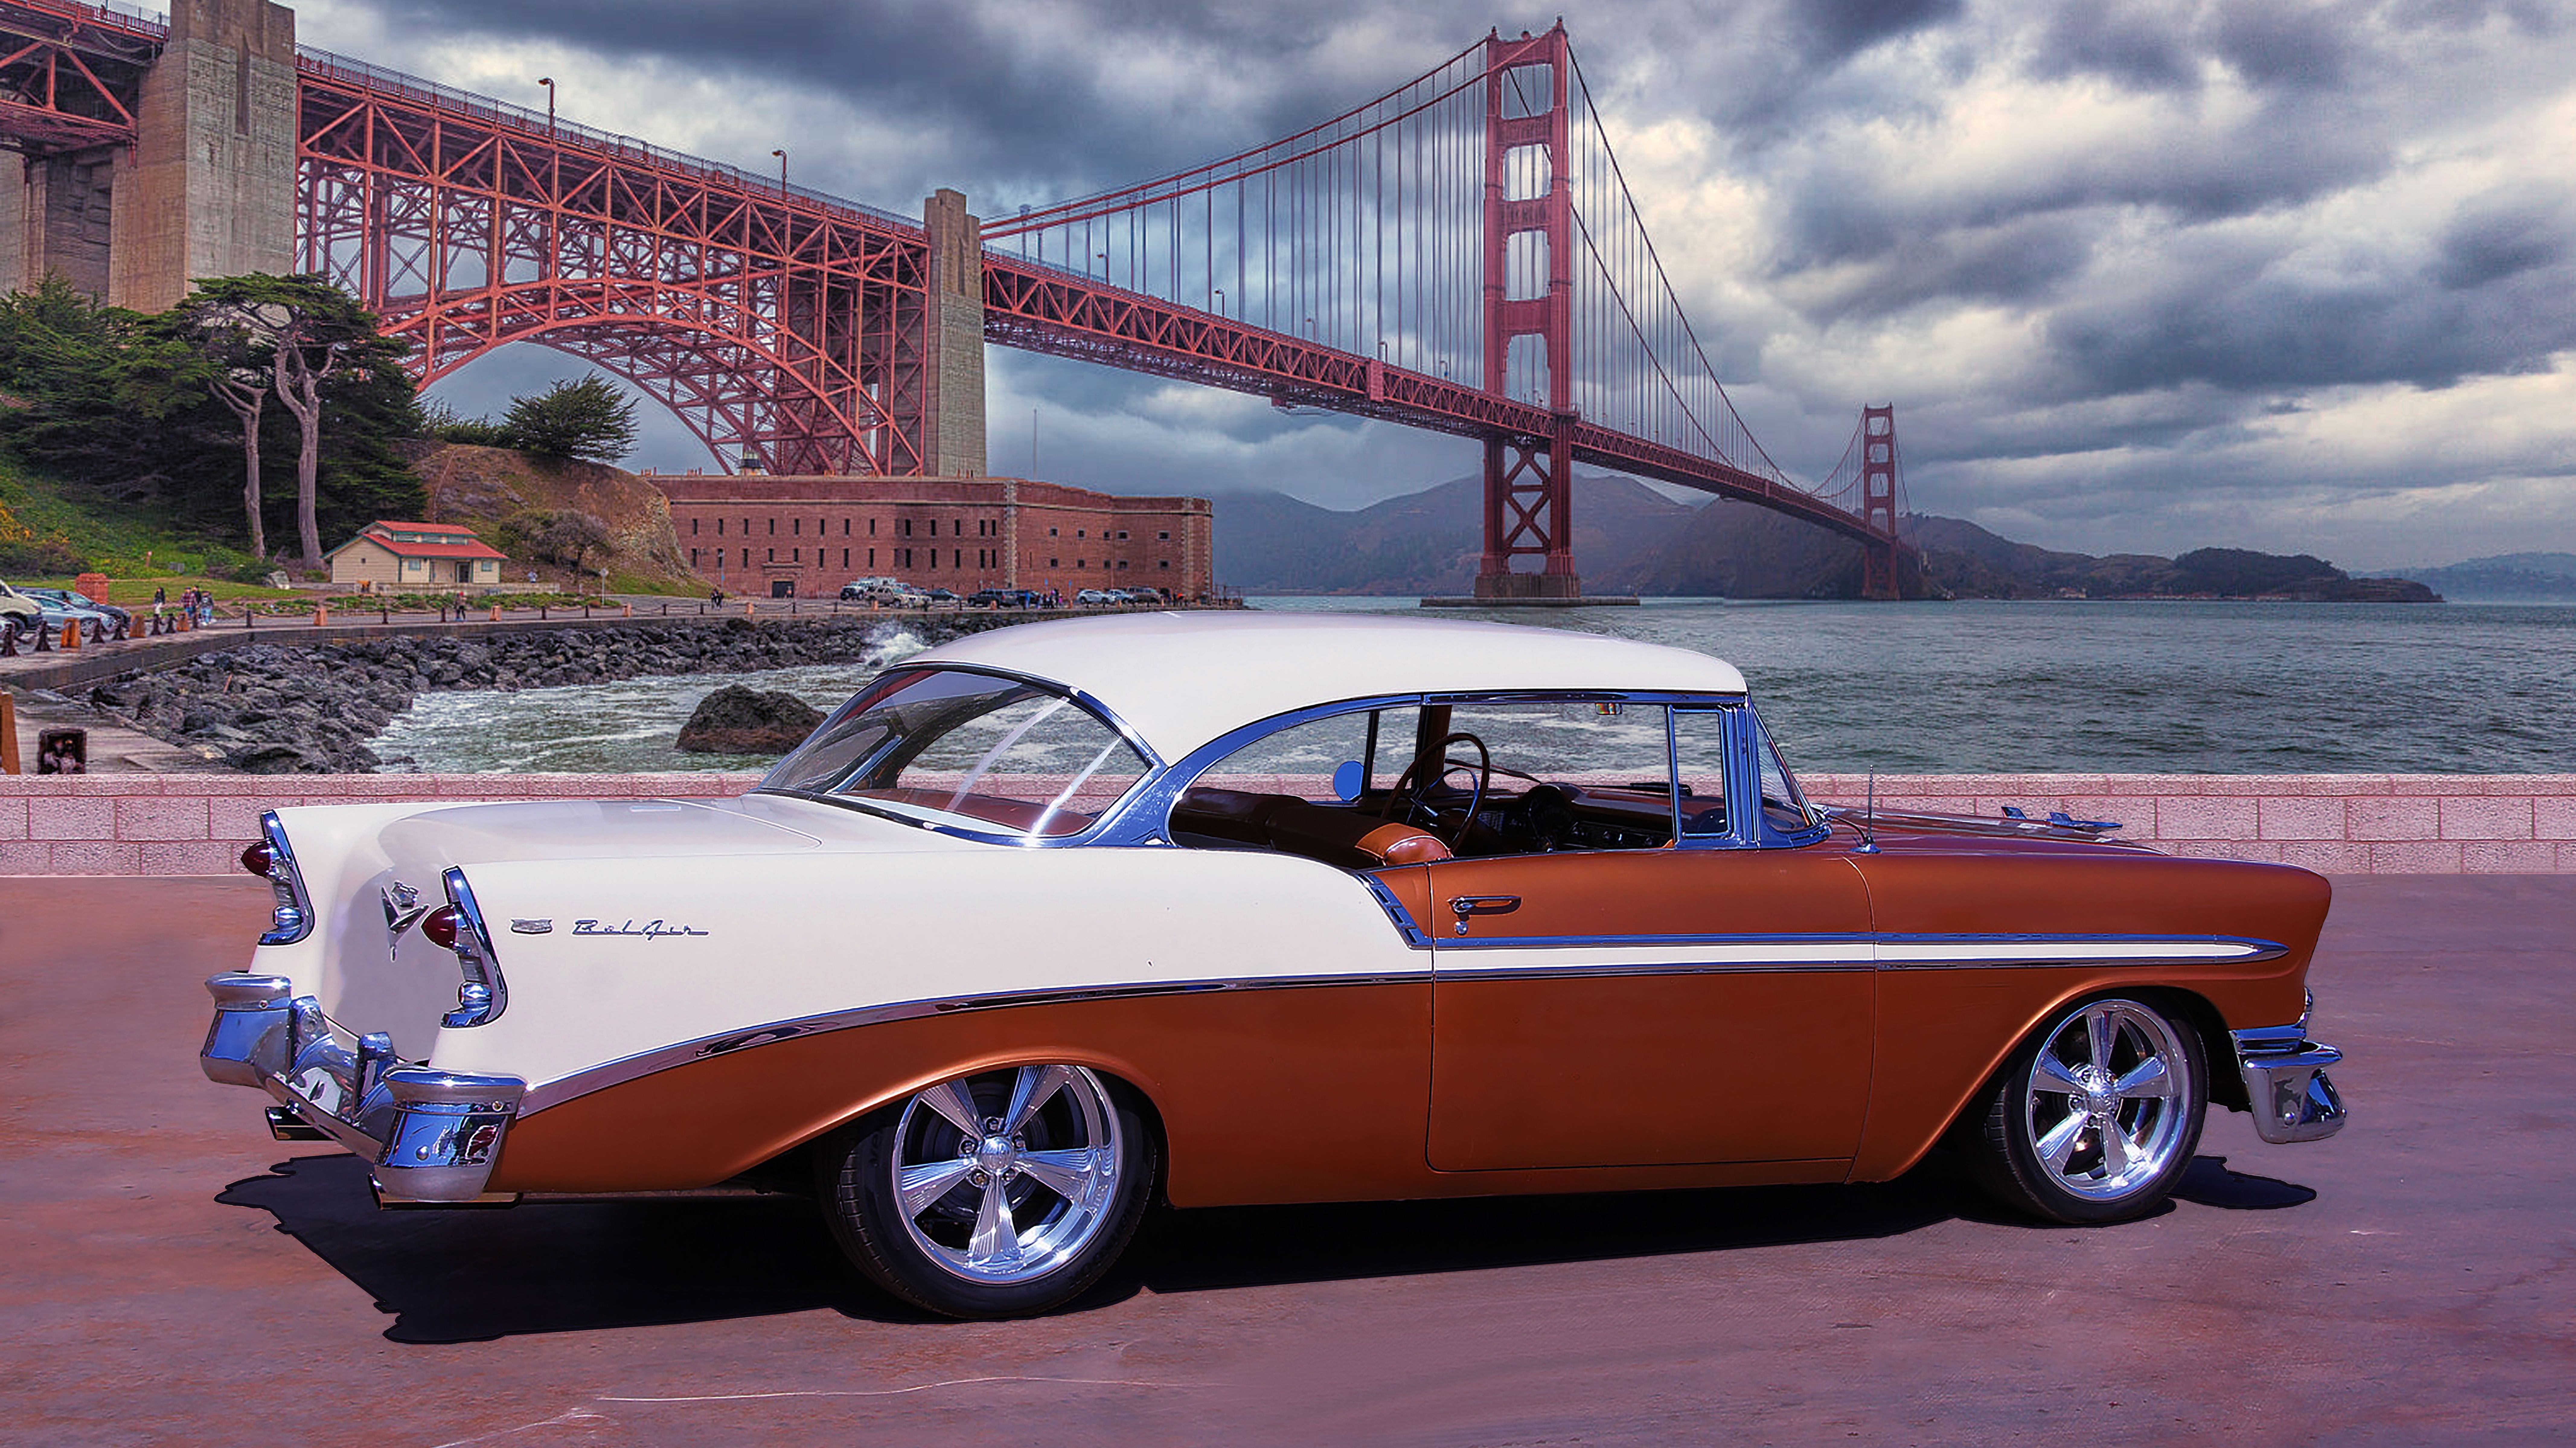 Chevy Belair Hardtop (two Tone). High def wallpaper, Chevy